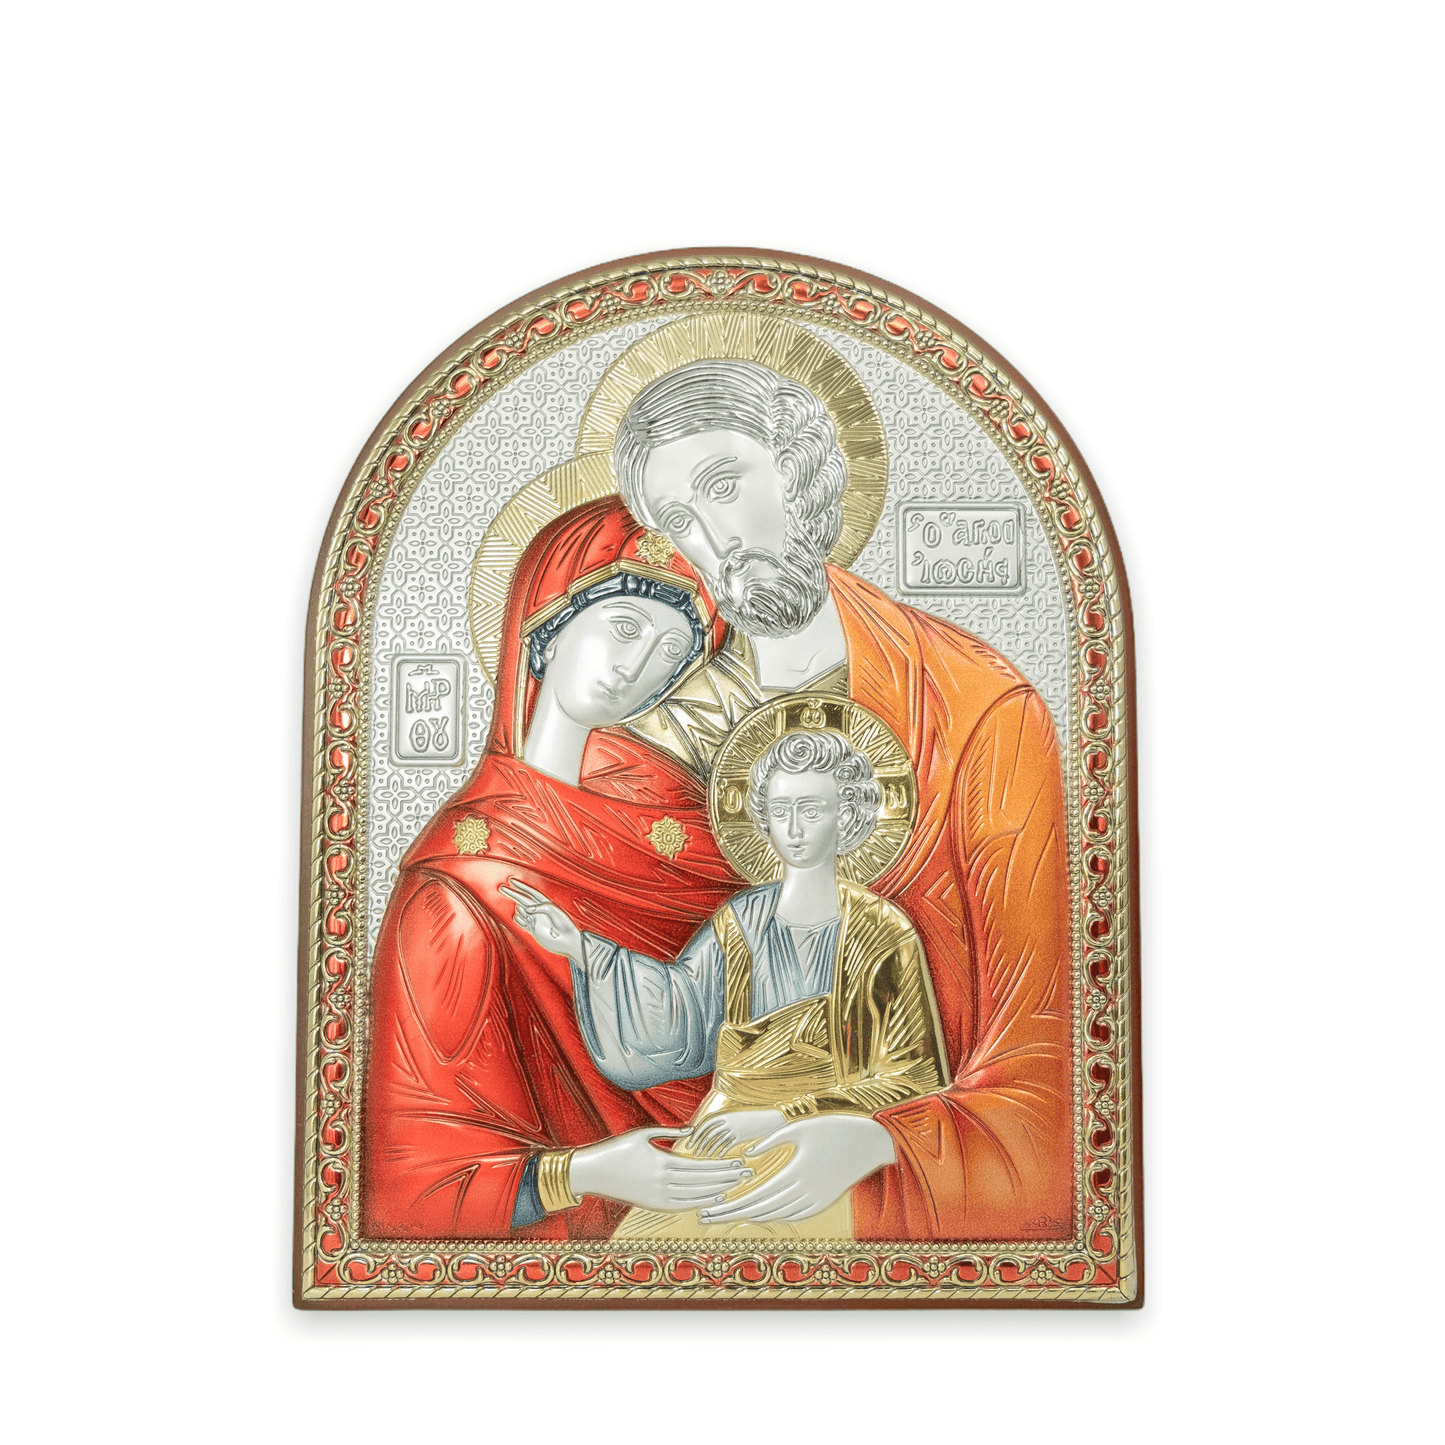 MONDO CATTOLICO 18X14 cm Sacred Family Bilaminated Sterling Silver Painting